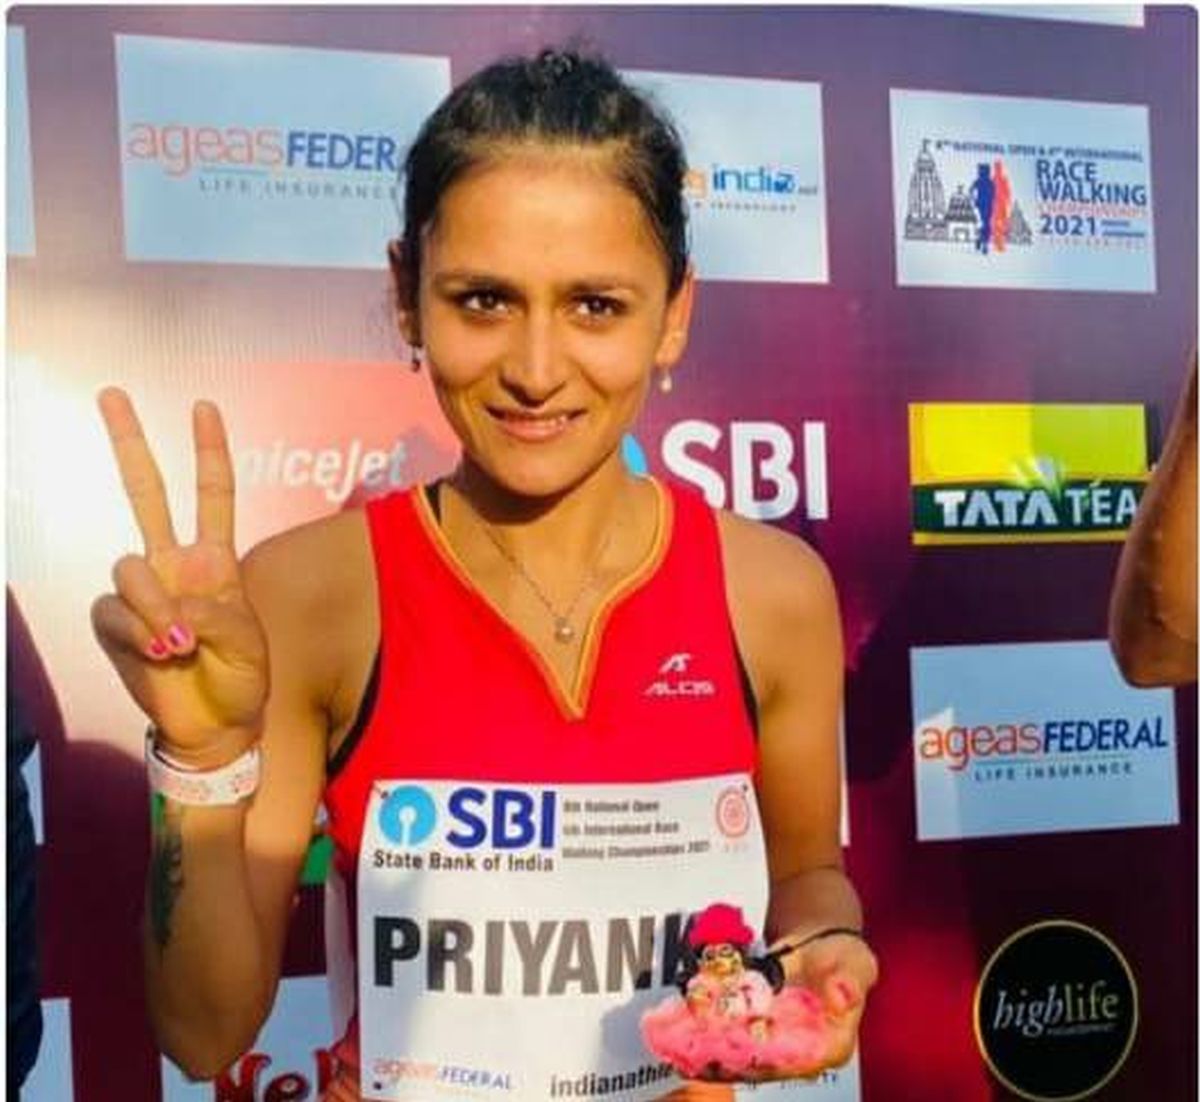 Priyanka Goswami shattered a national record in the women's 20km event while qualifying for the Tokyo Olympics in February